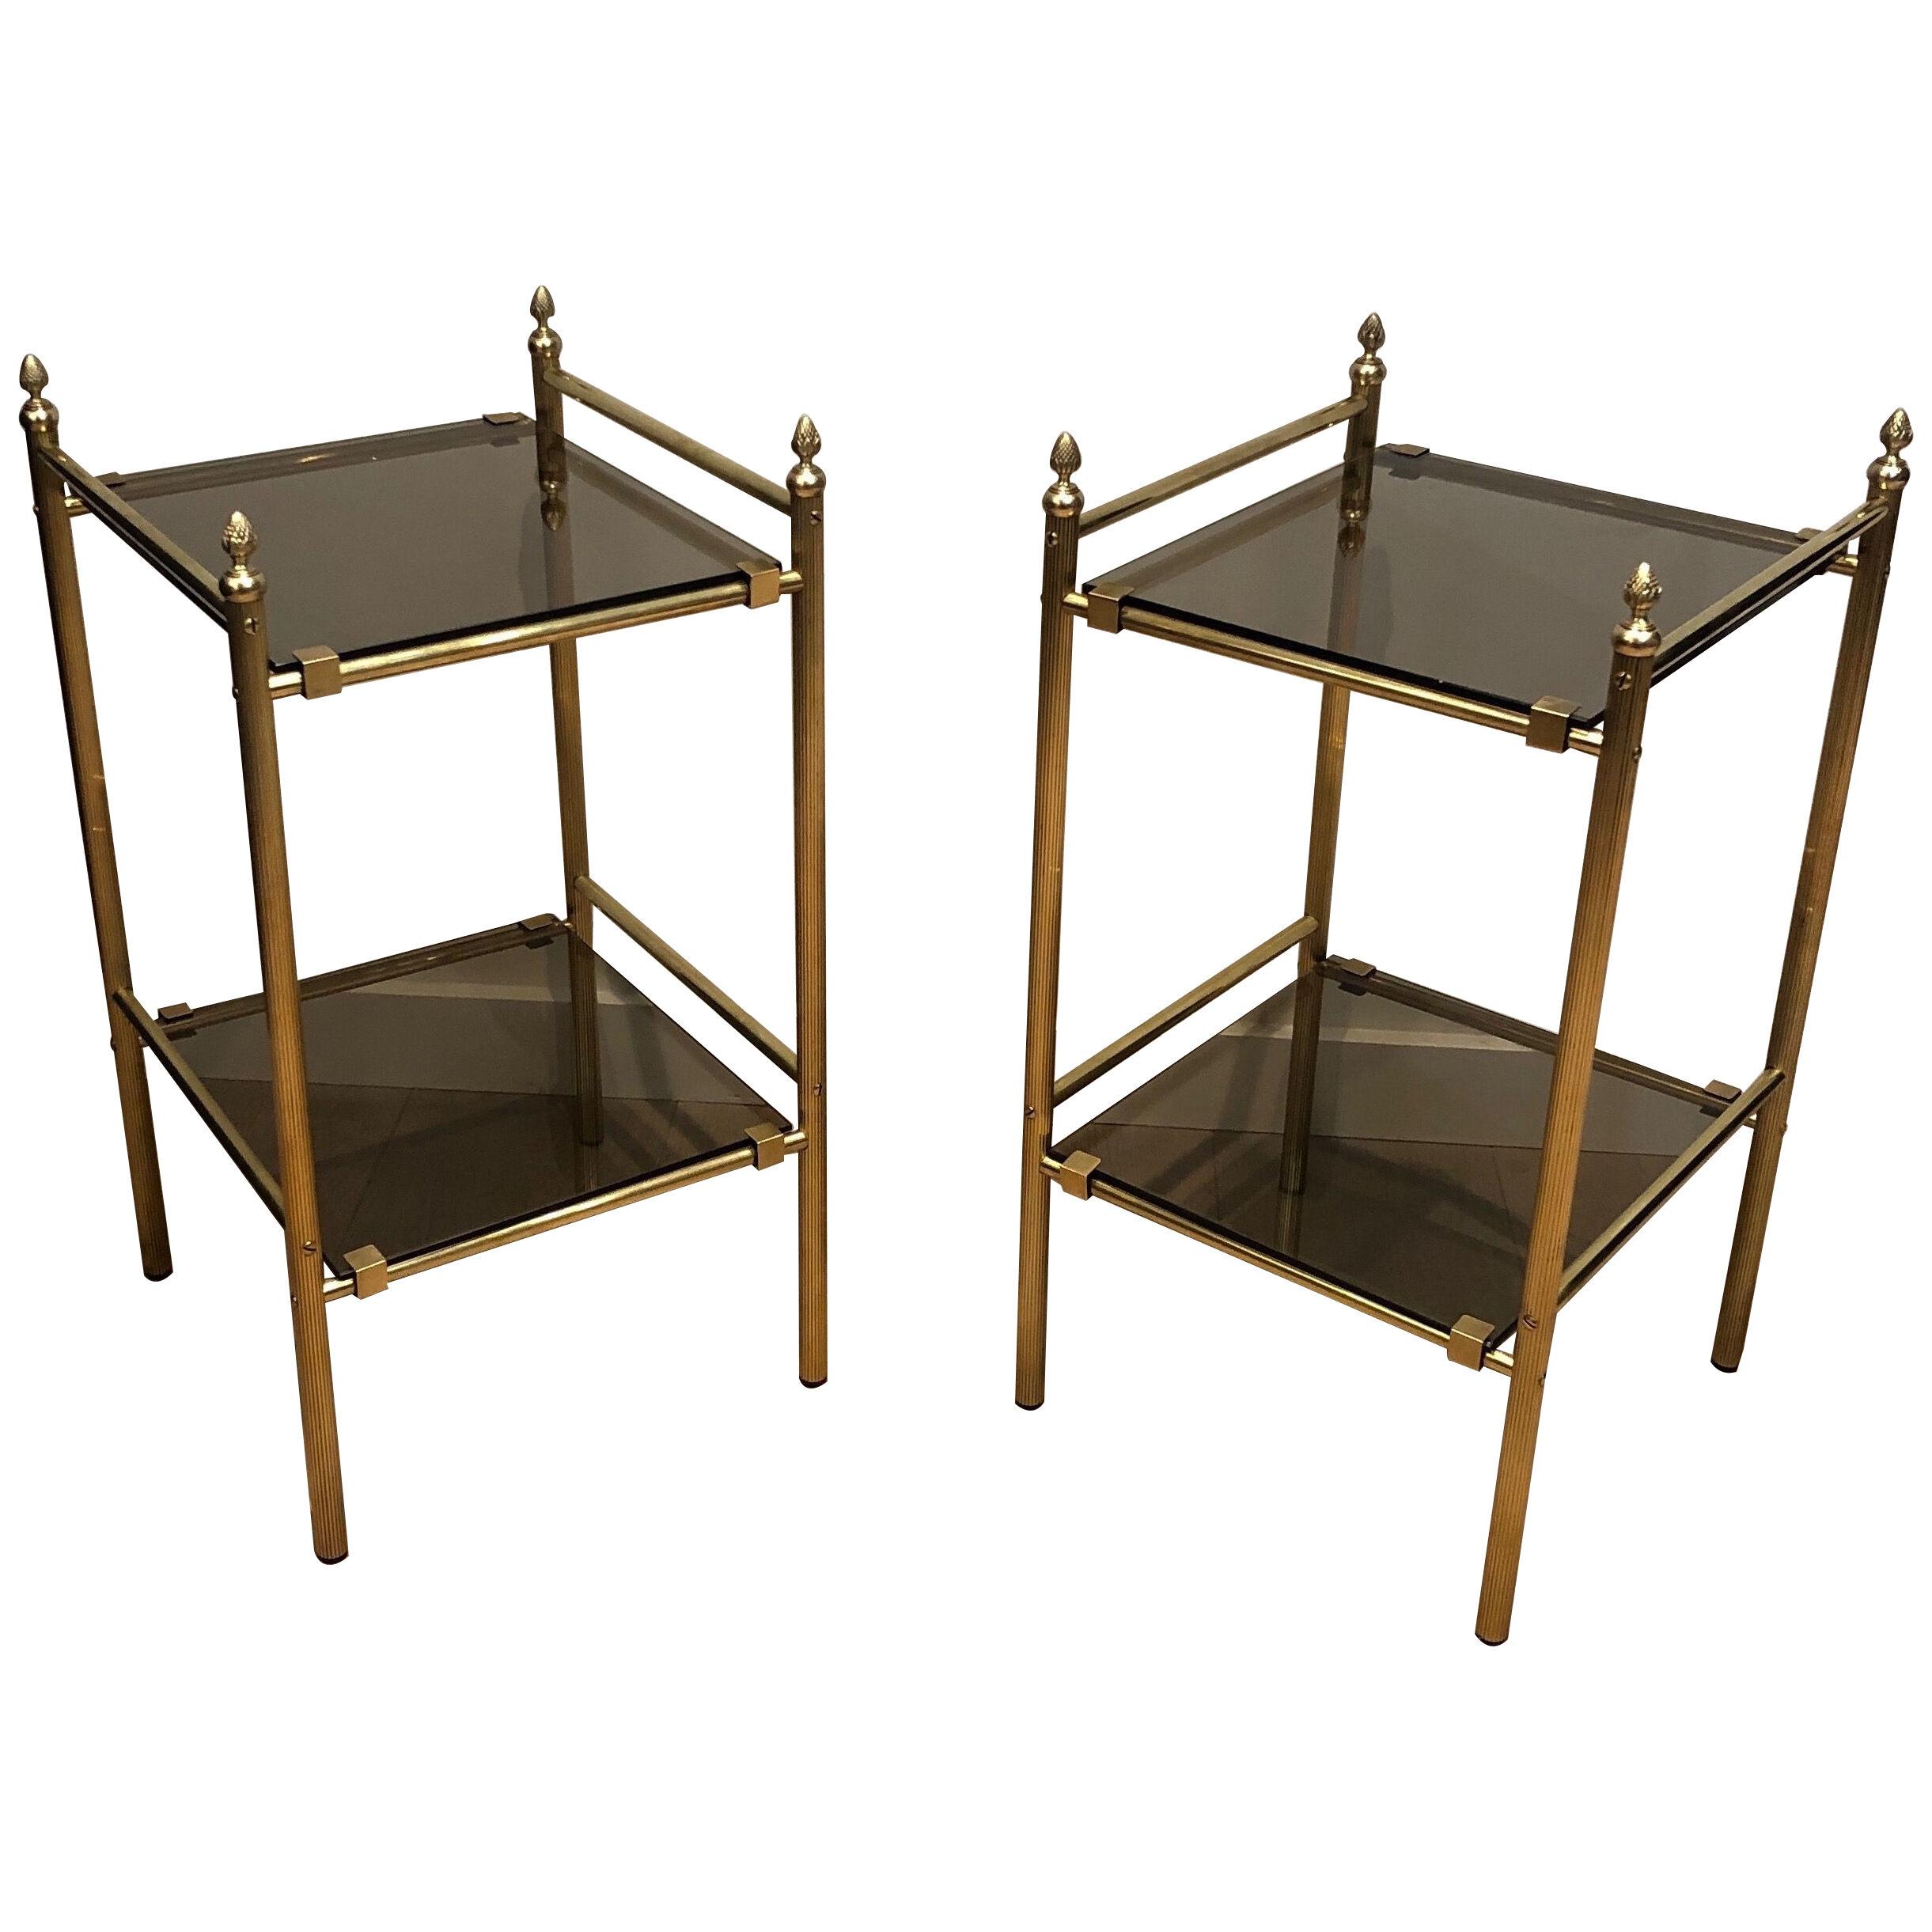 Pair of Brass Side Tables In the style of Maison Jansen